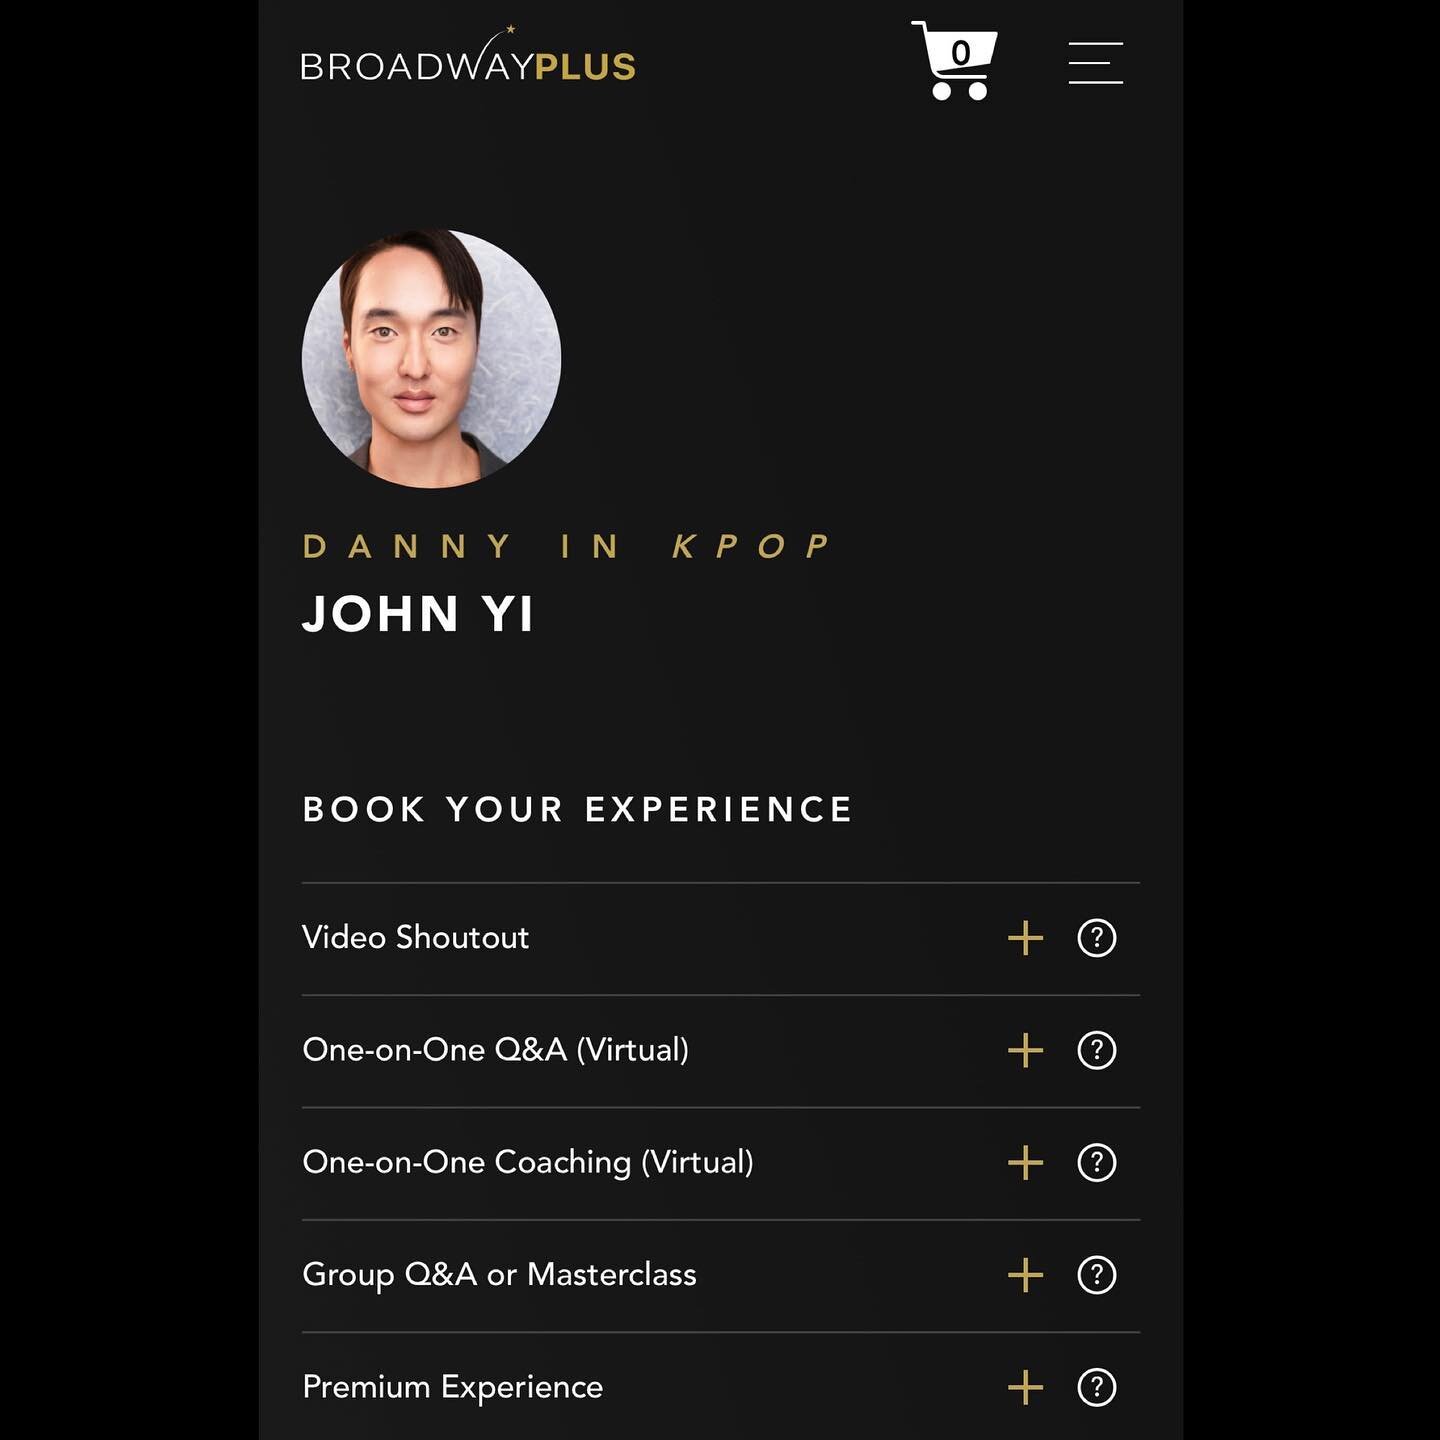 I&rsquo;m thrilled to be joining the group of artists over at @broadwayplus 💫 Available for meet-and-greets, coaching, group workshops, video shoutouts, and more! Link in bio to learn more. ❤️